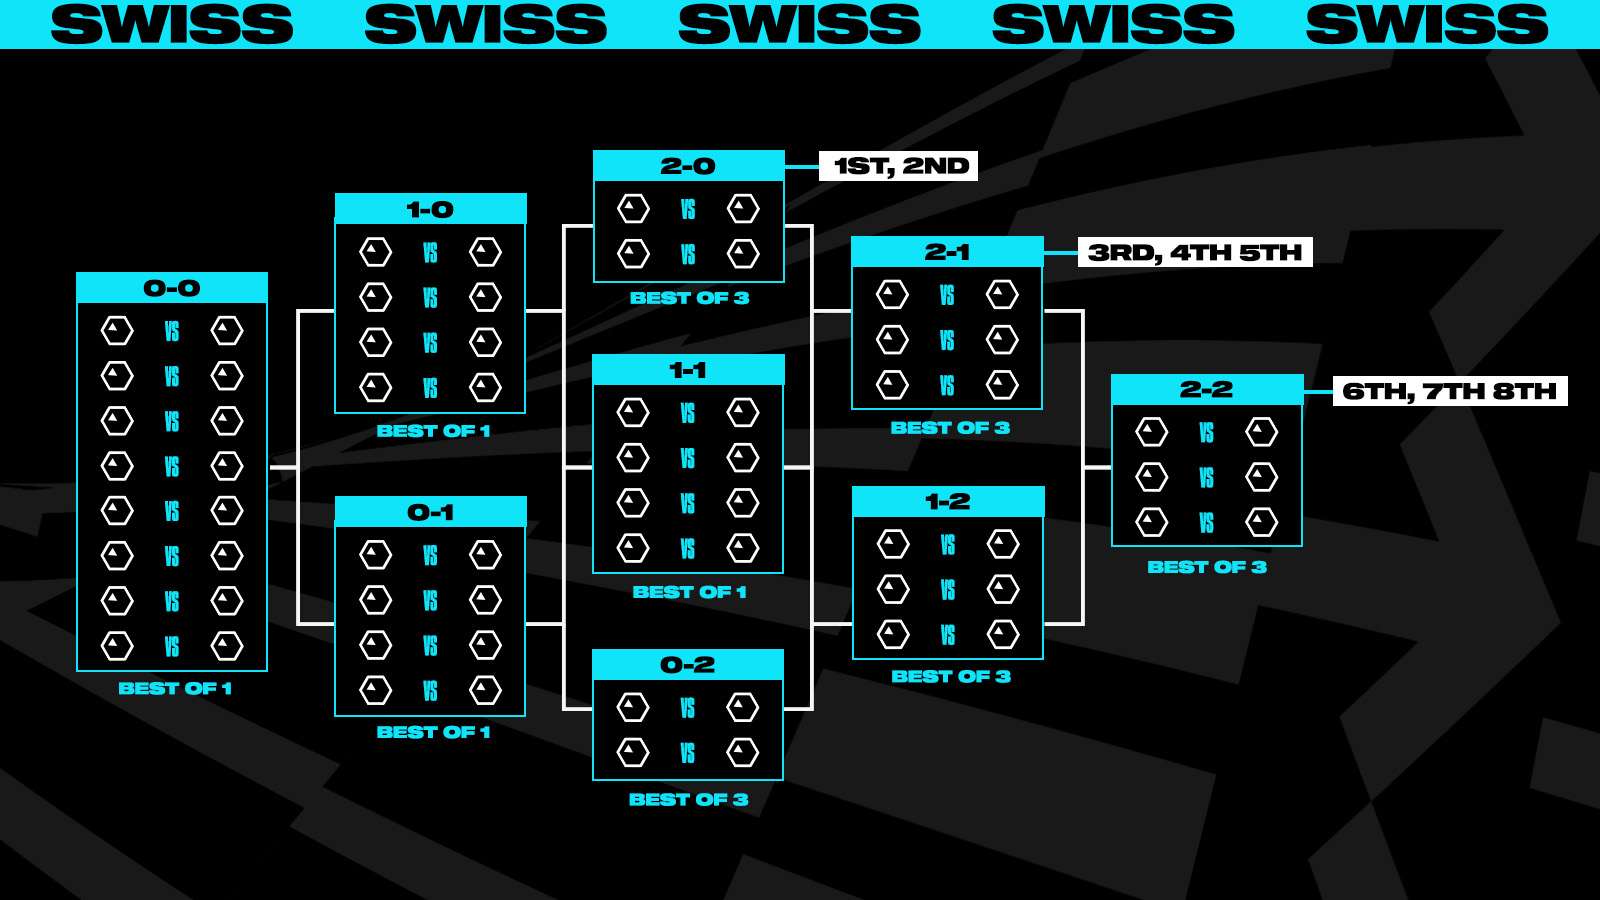 Swiss Round with 5 Rounds of competition.